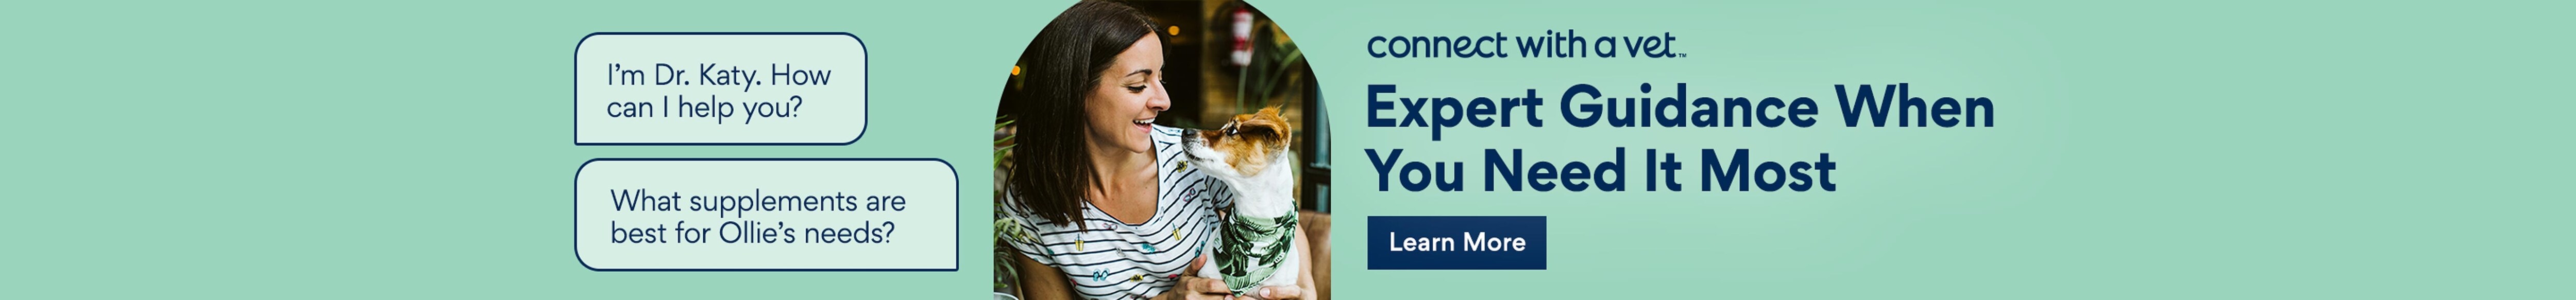 Connect with a Vet. Expert guidance when you need it most.